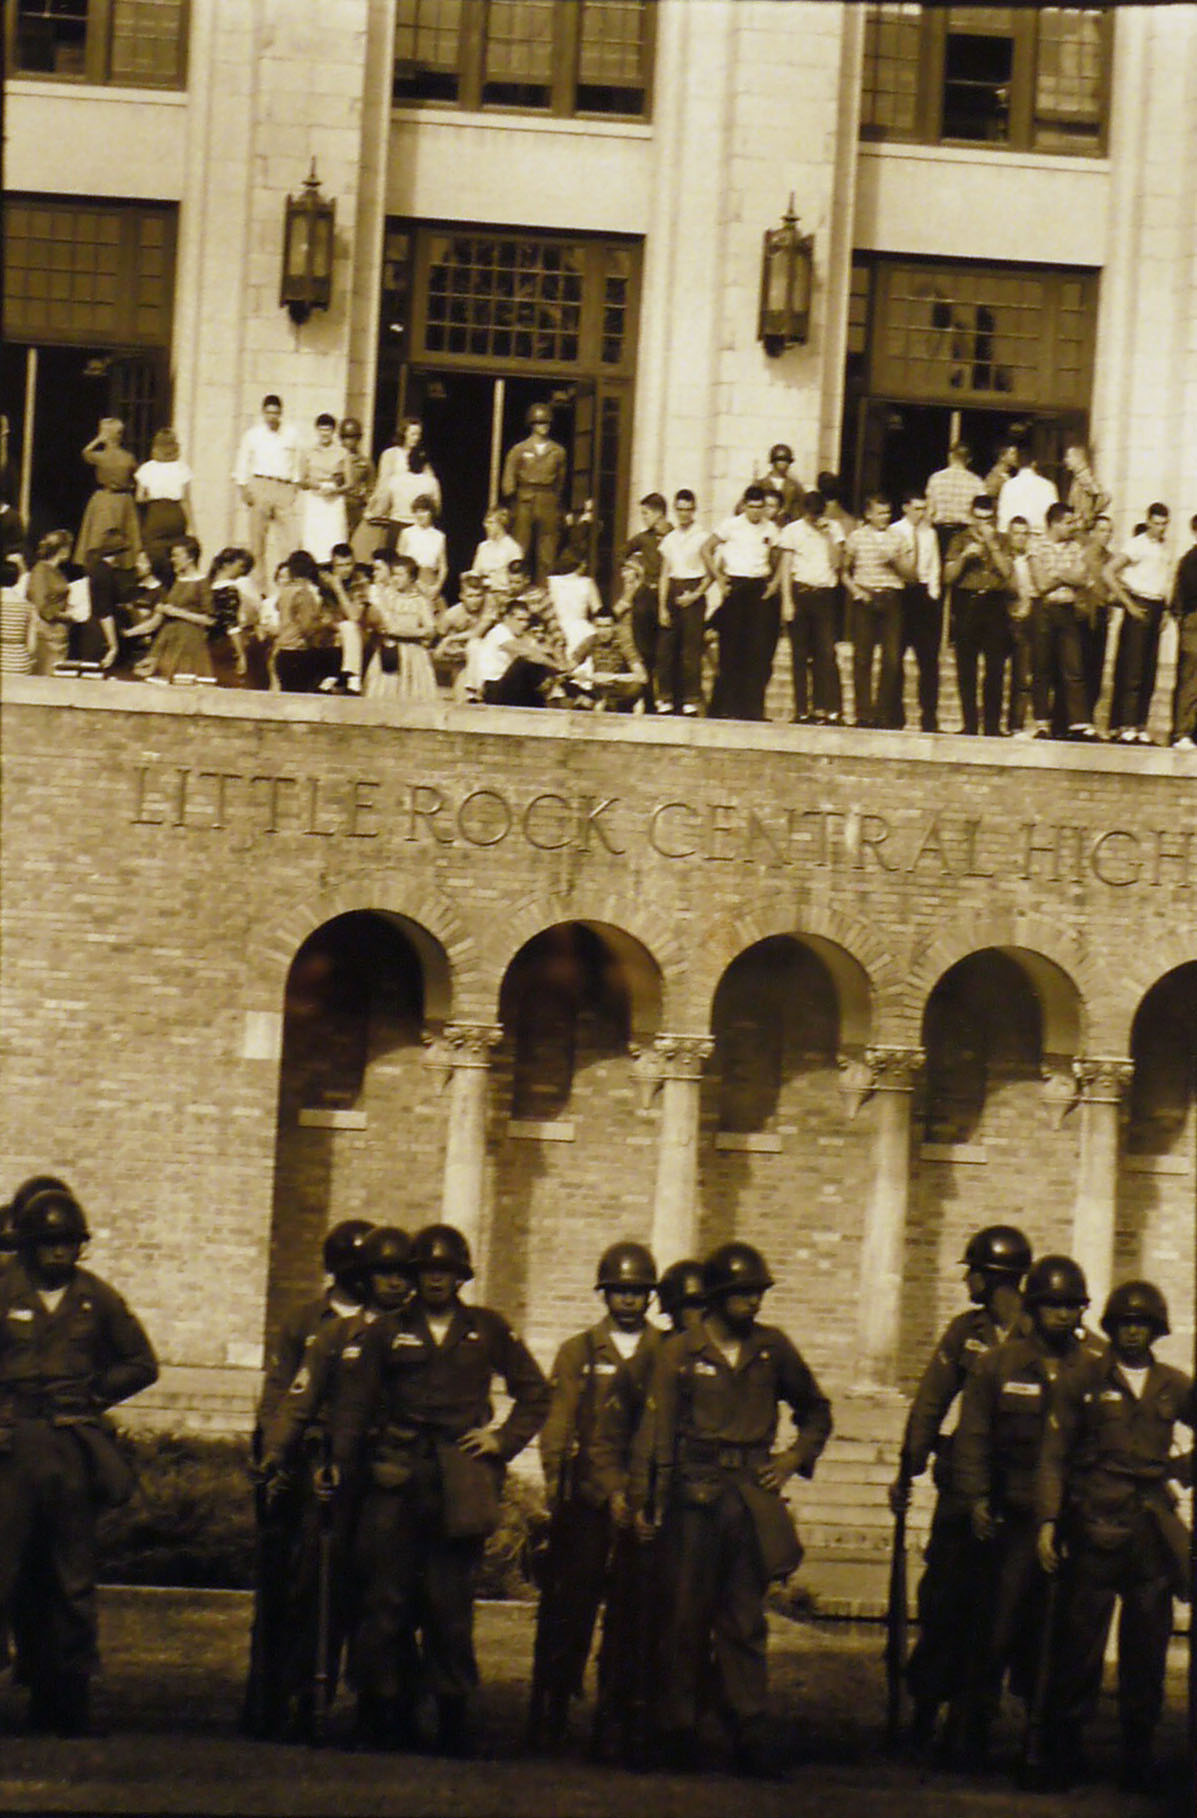 soldiers stand guard during the integration of Little Rock Central High School